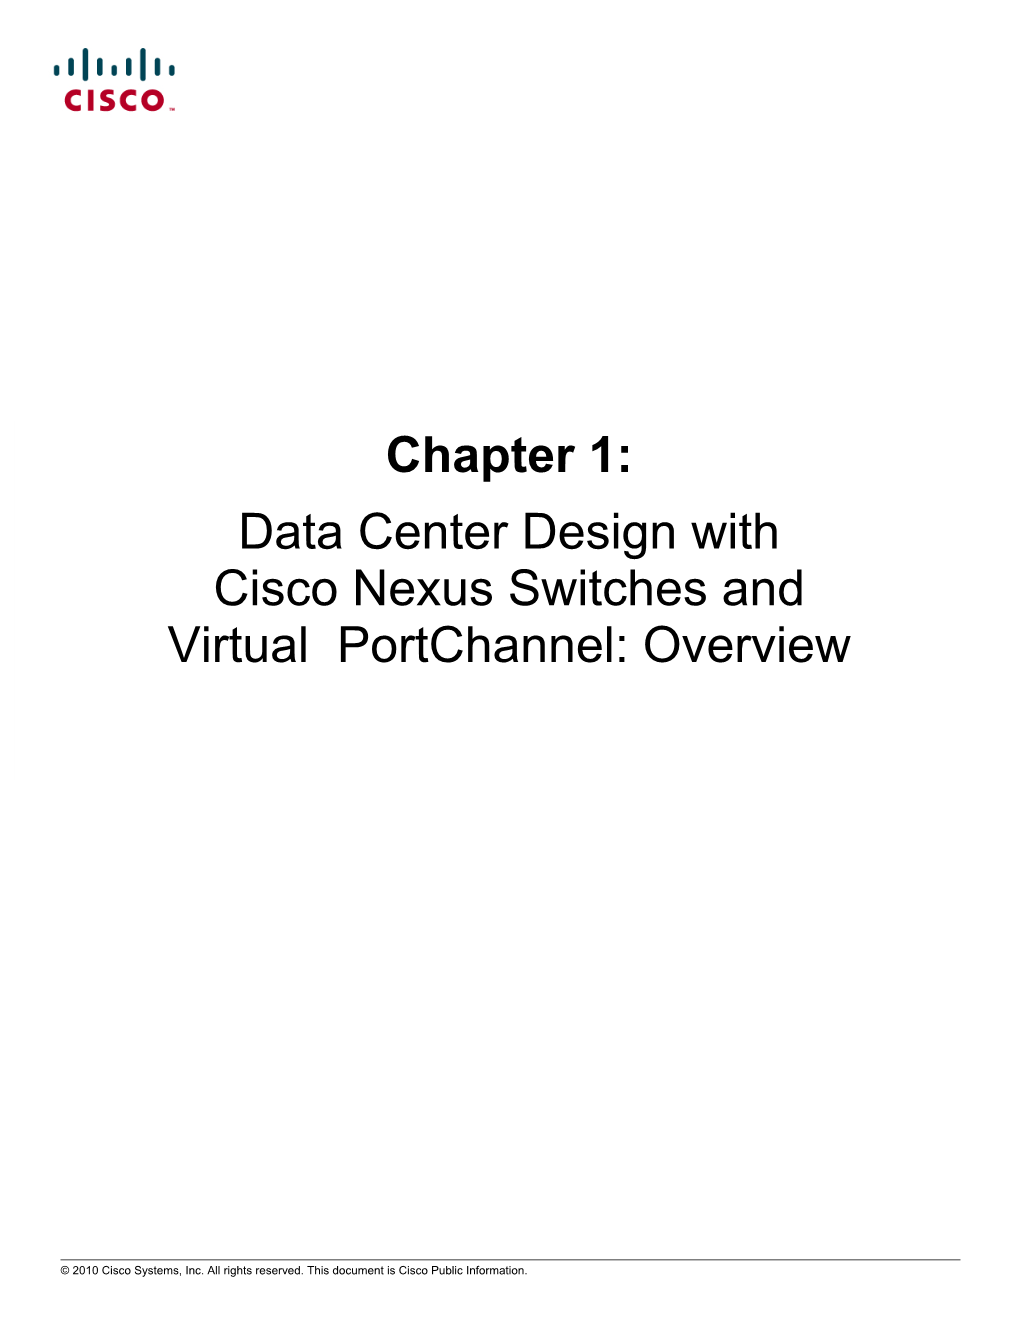 Data Center Design with Cisco Nexus Switches and Virtual Portchannel: Overview (Chapter 1, This Document)